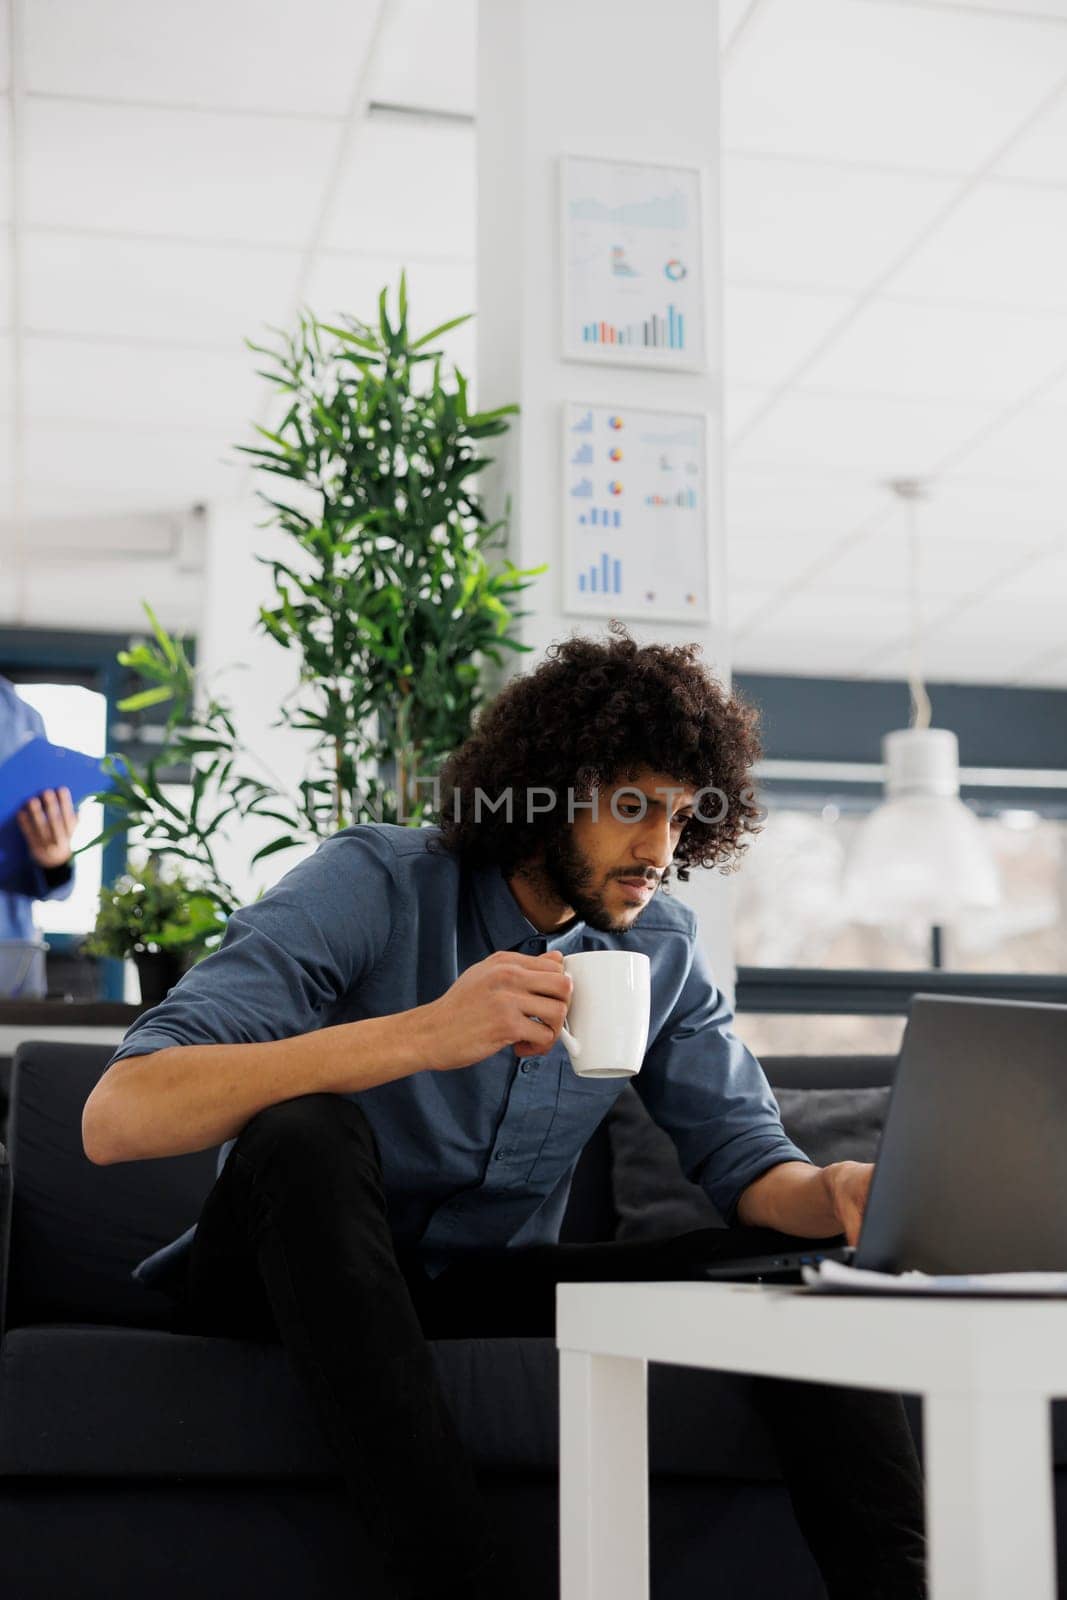 Arab company employee drinking coffee and reading customer email on laptop in office. Business start up focused entrepreneur holding tea mug and managing project in coworking space